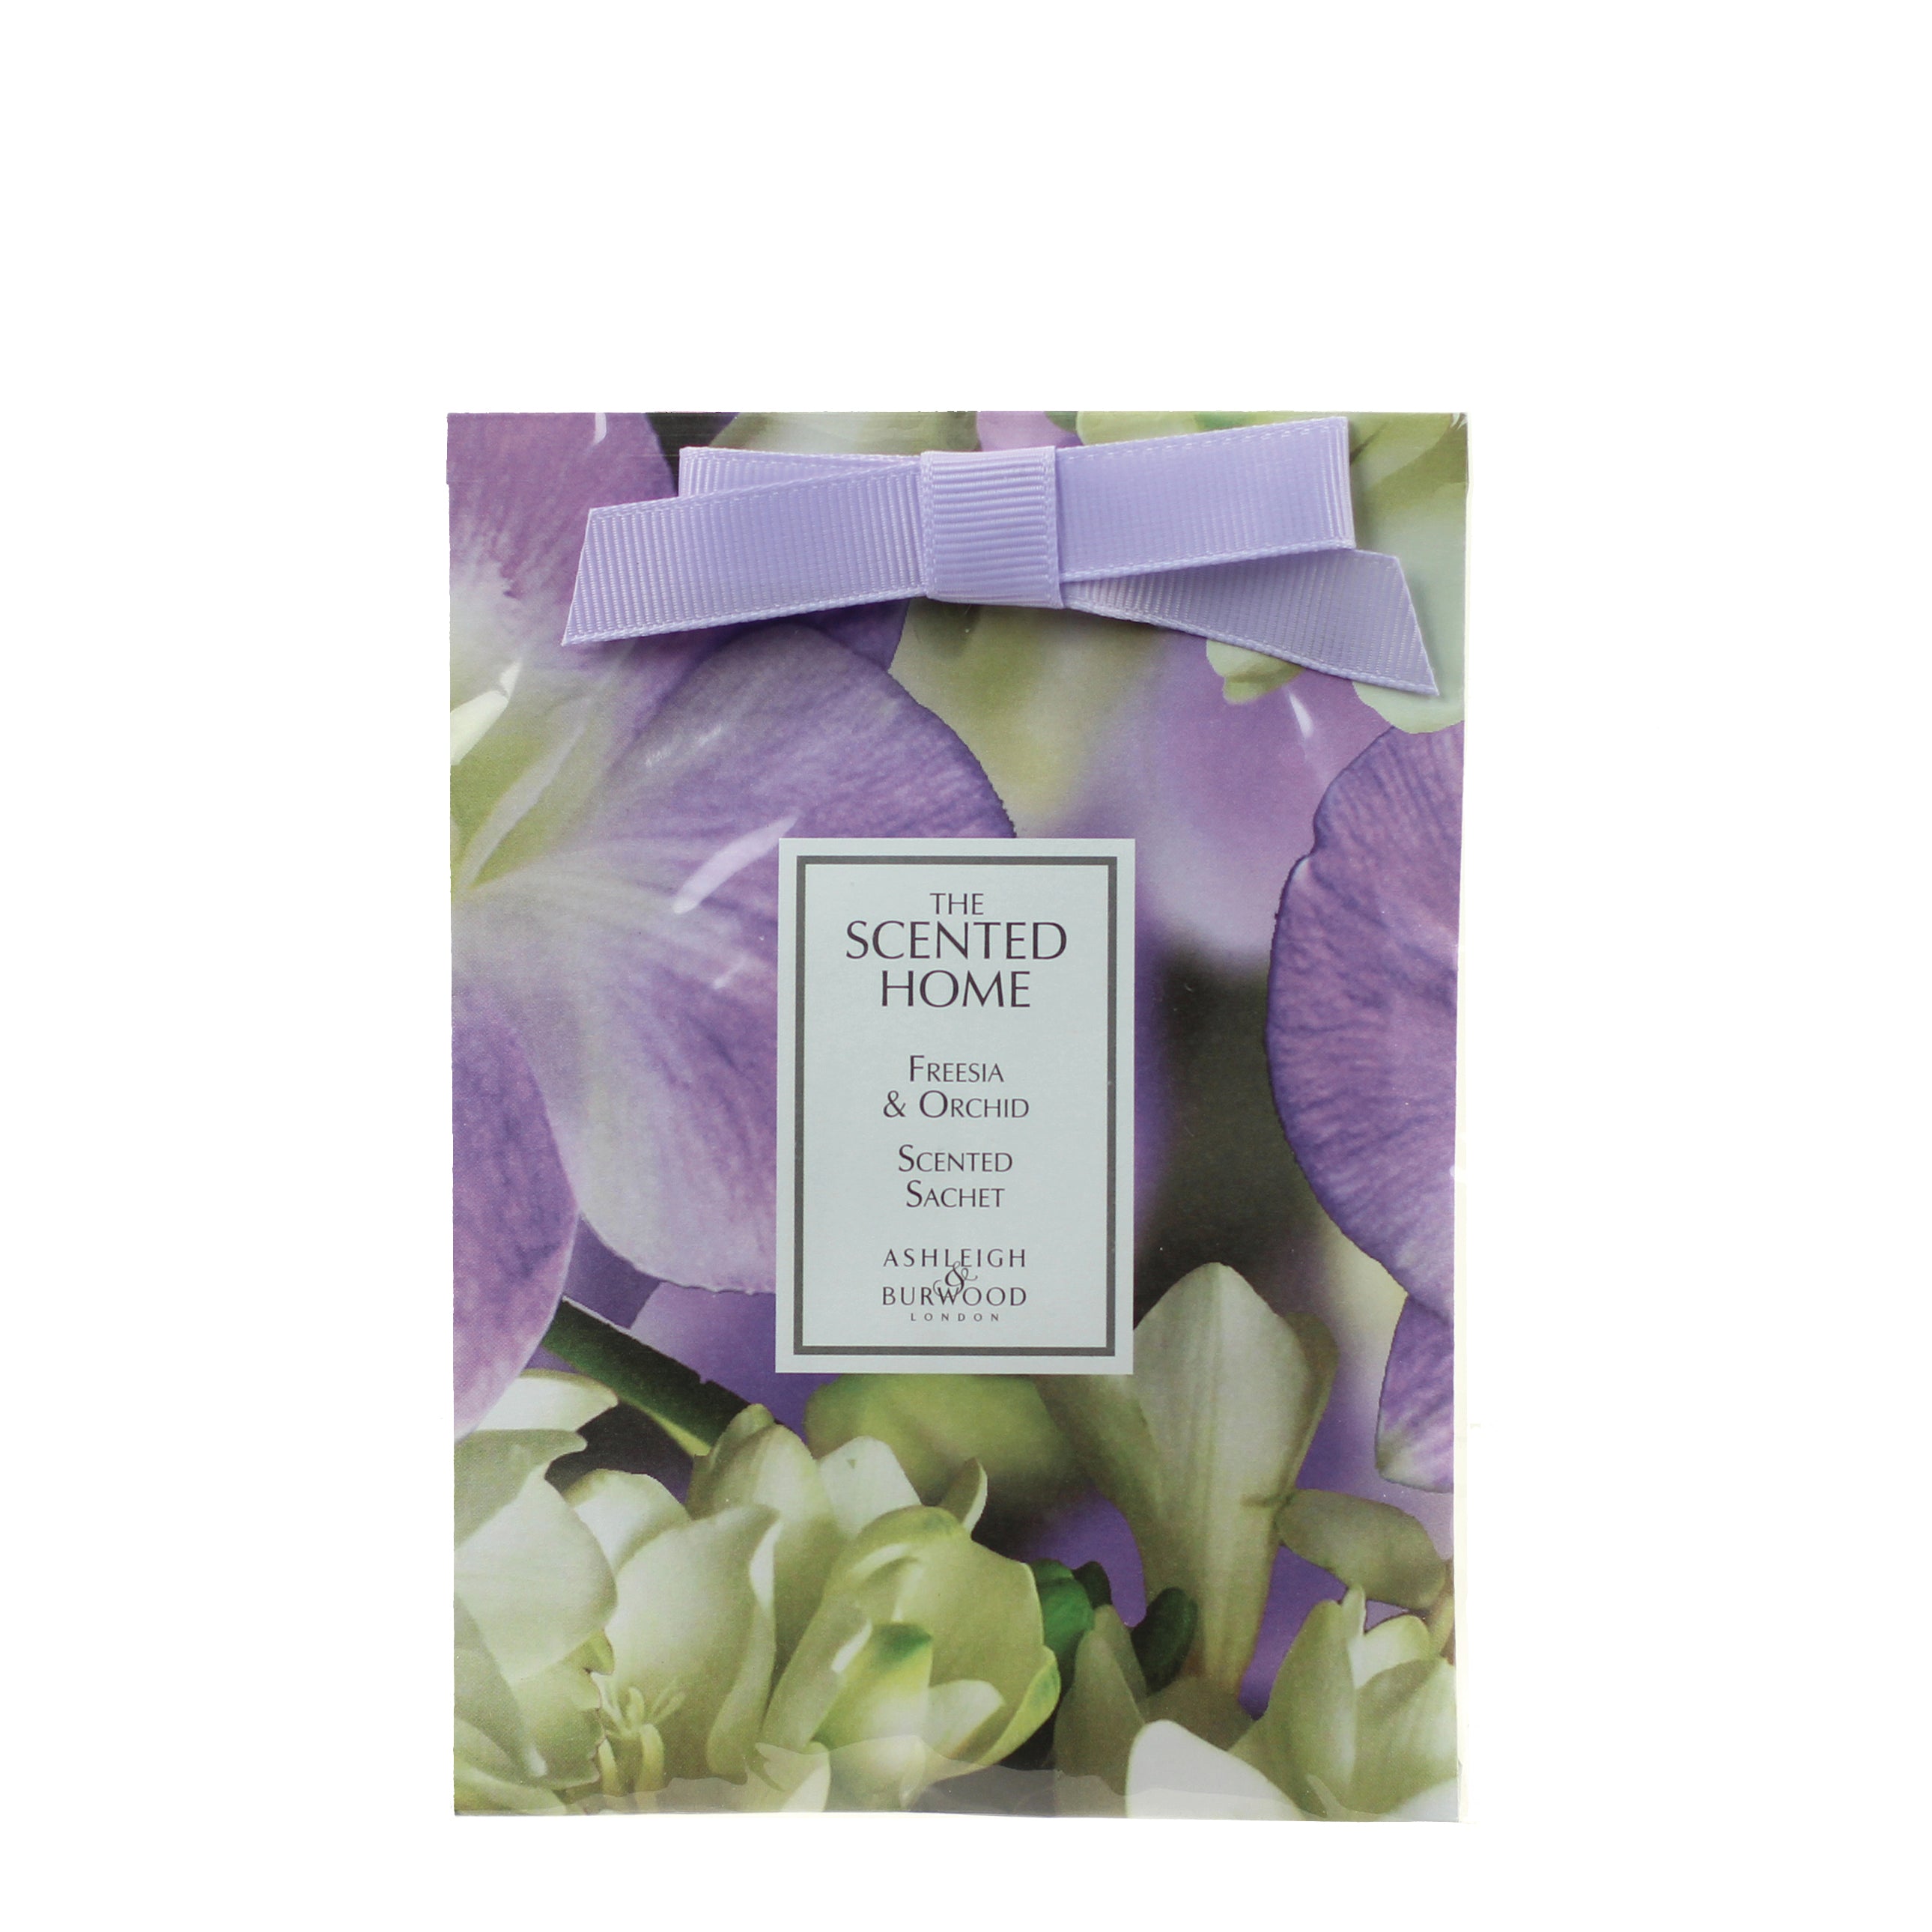 SCENTED SACHET 20G FREESIA & ORCHID - SCENTED HOME